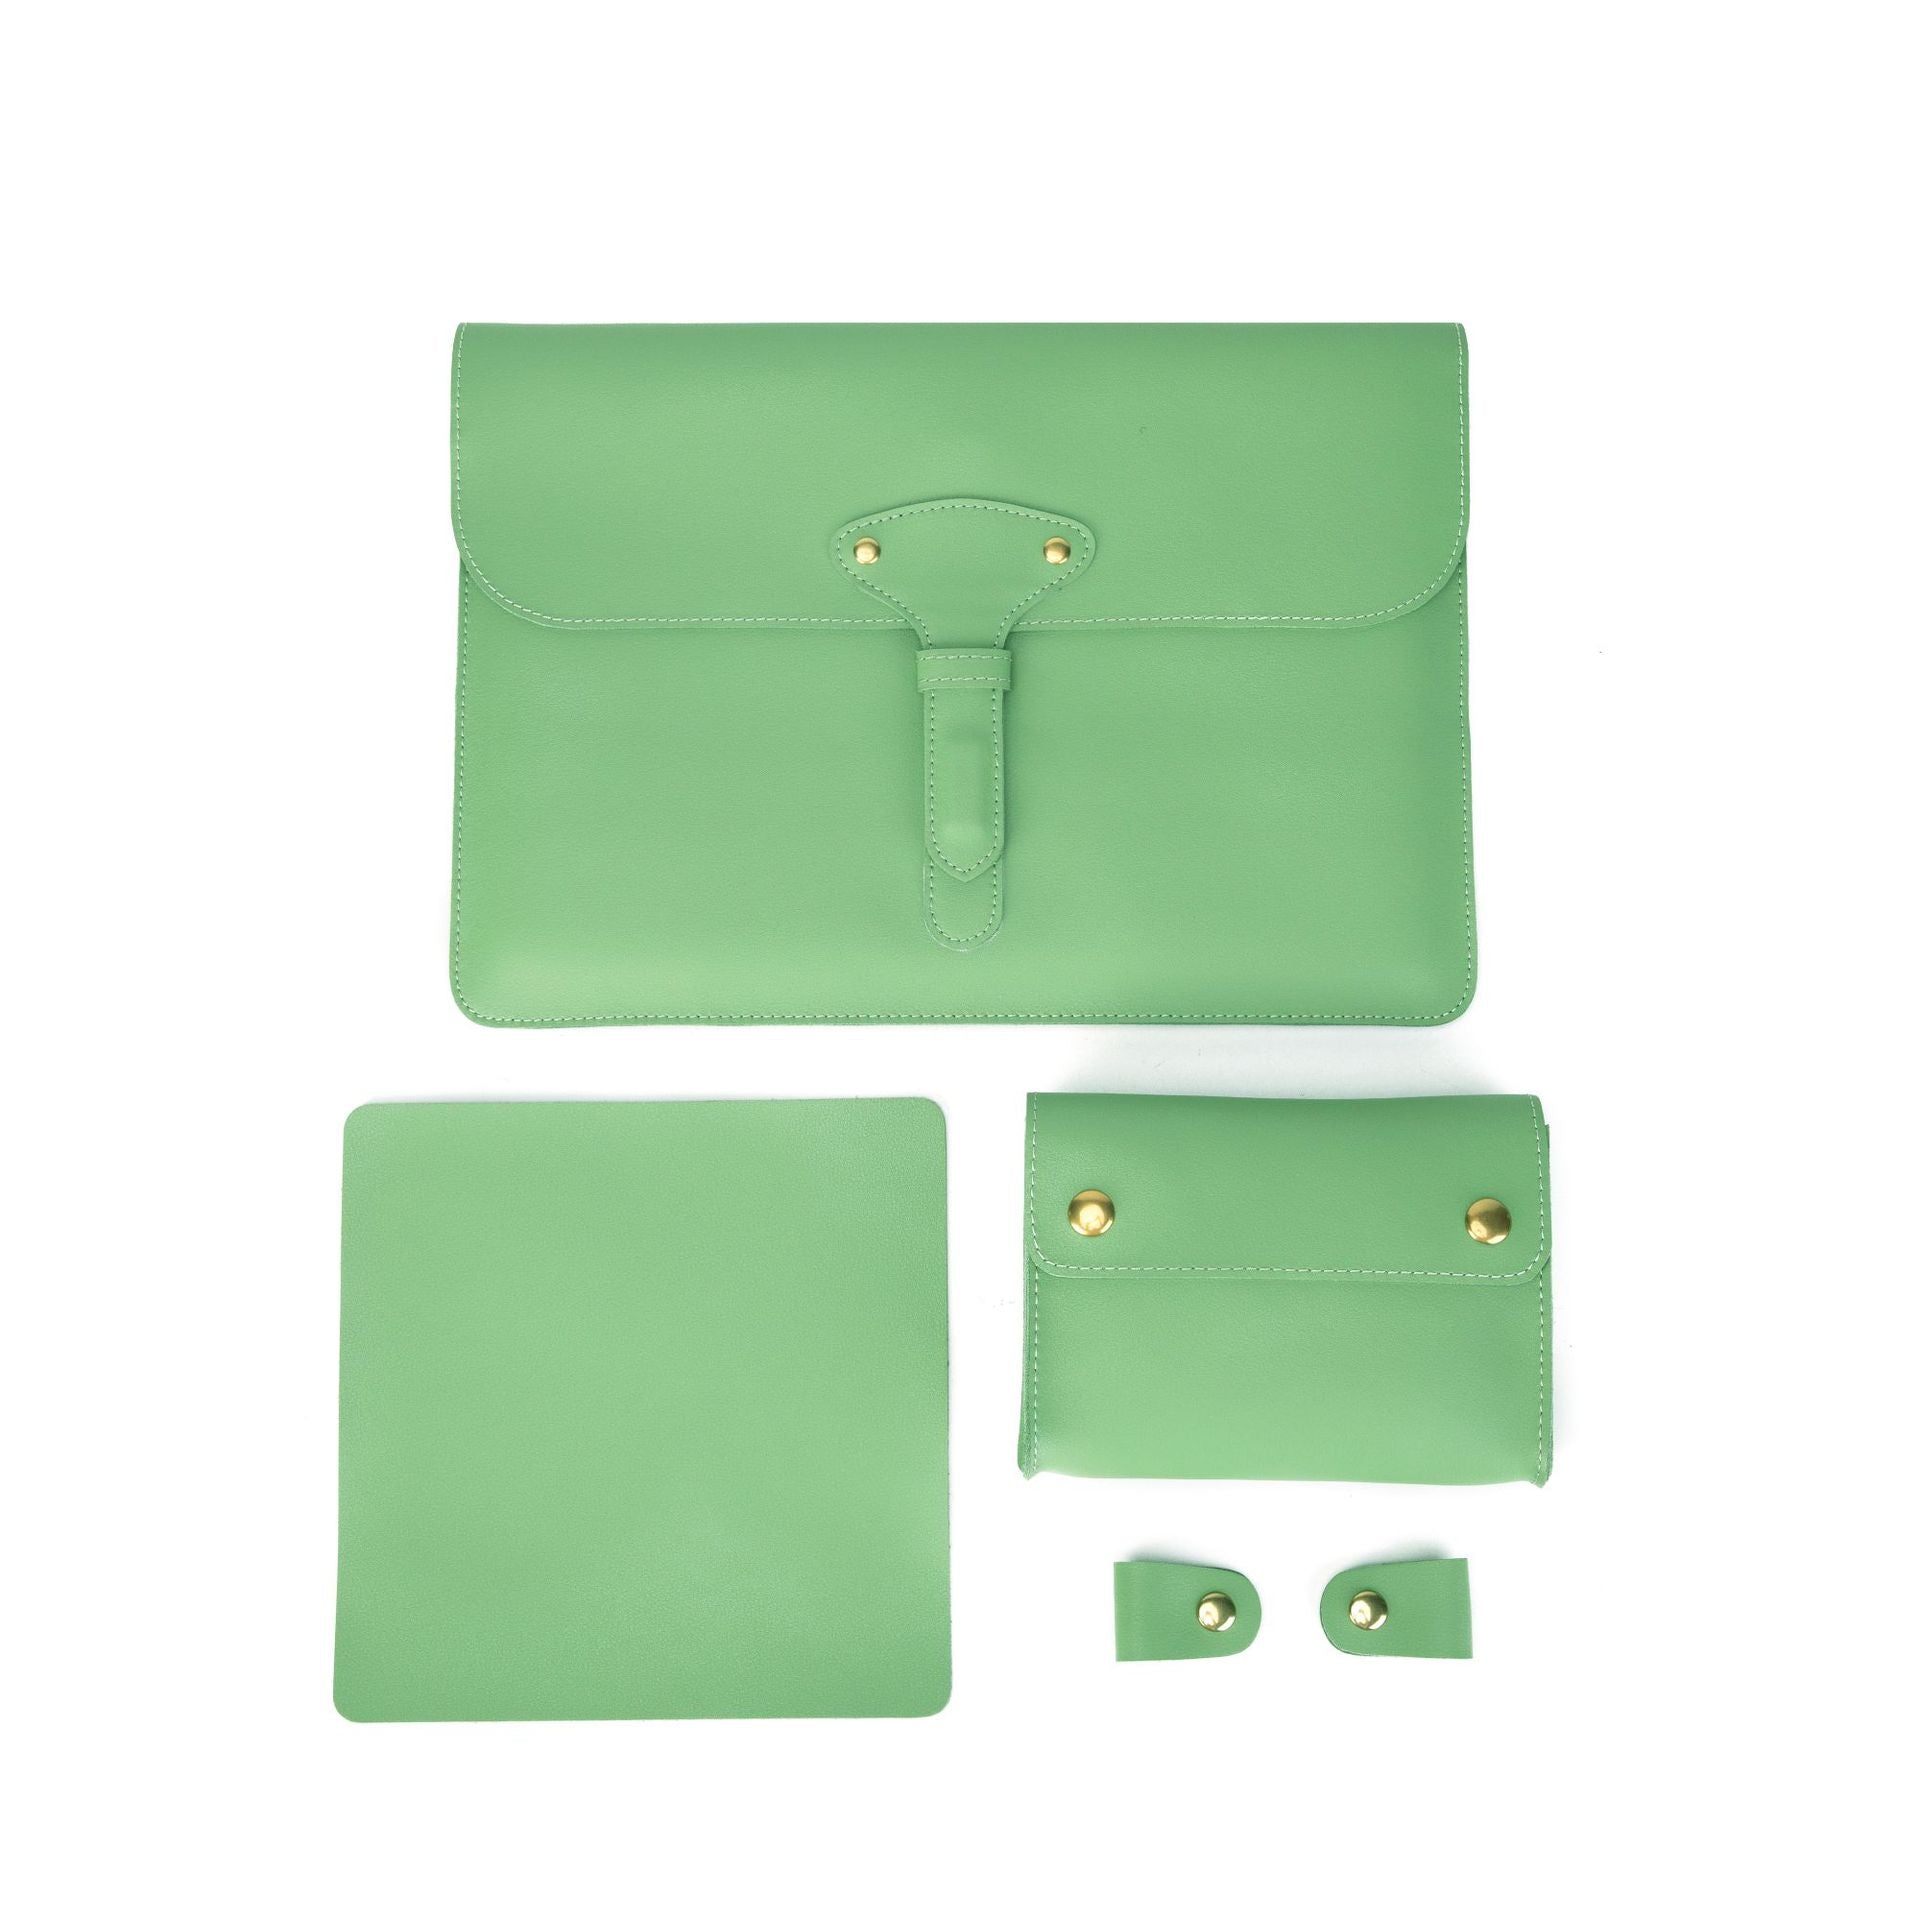 Fashion Women Leather Laptop Case 4pcs for Macbook-Leather Macbook Cases-Green-13inch-Free Shipping Leatheretro